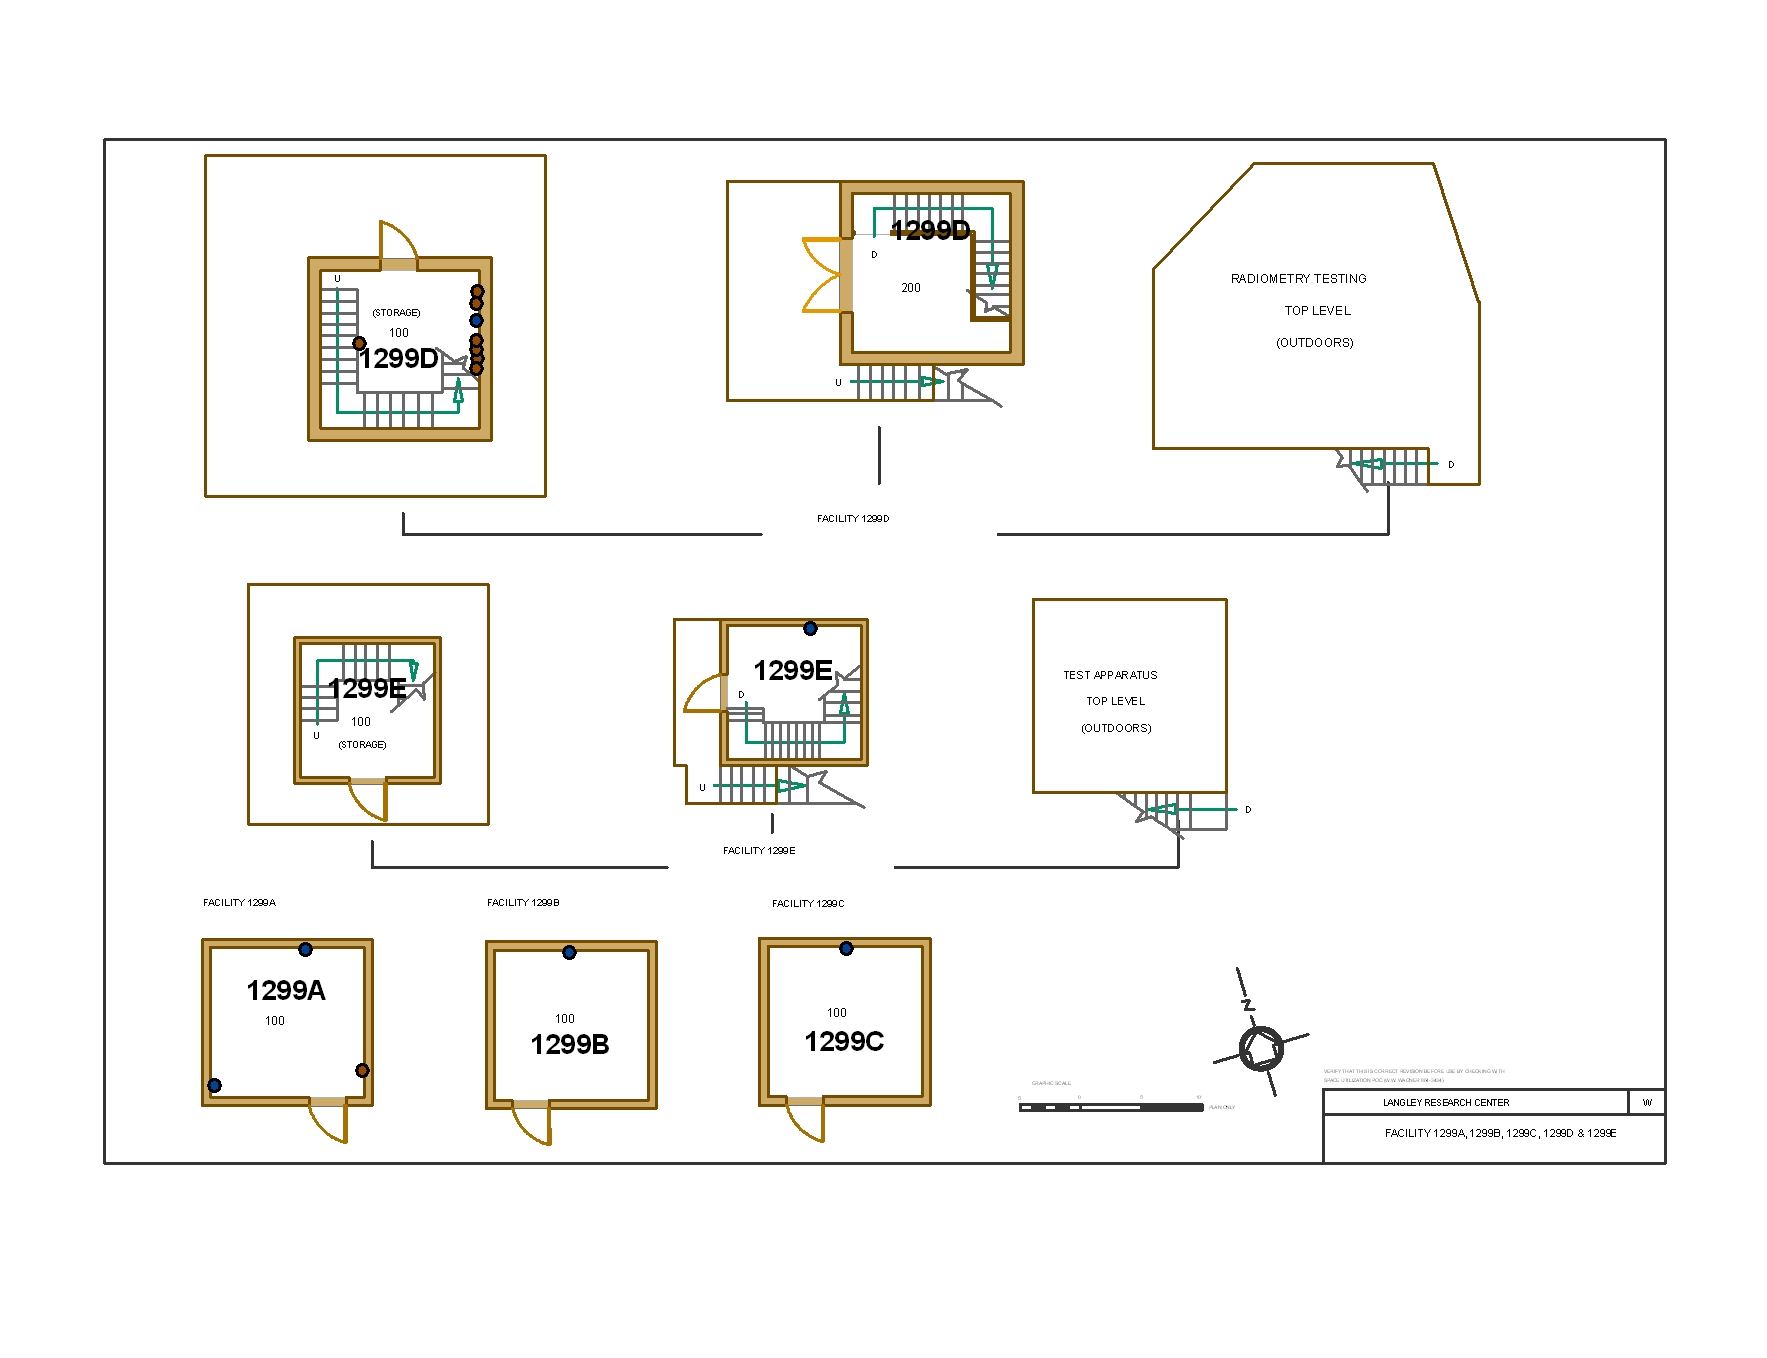 Building 1299 research complex floor plan from 2010. 